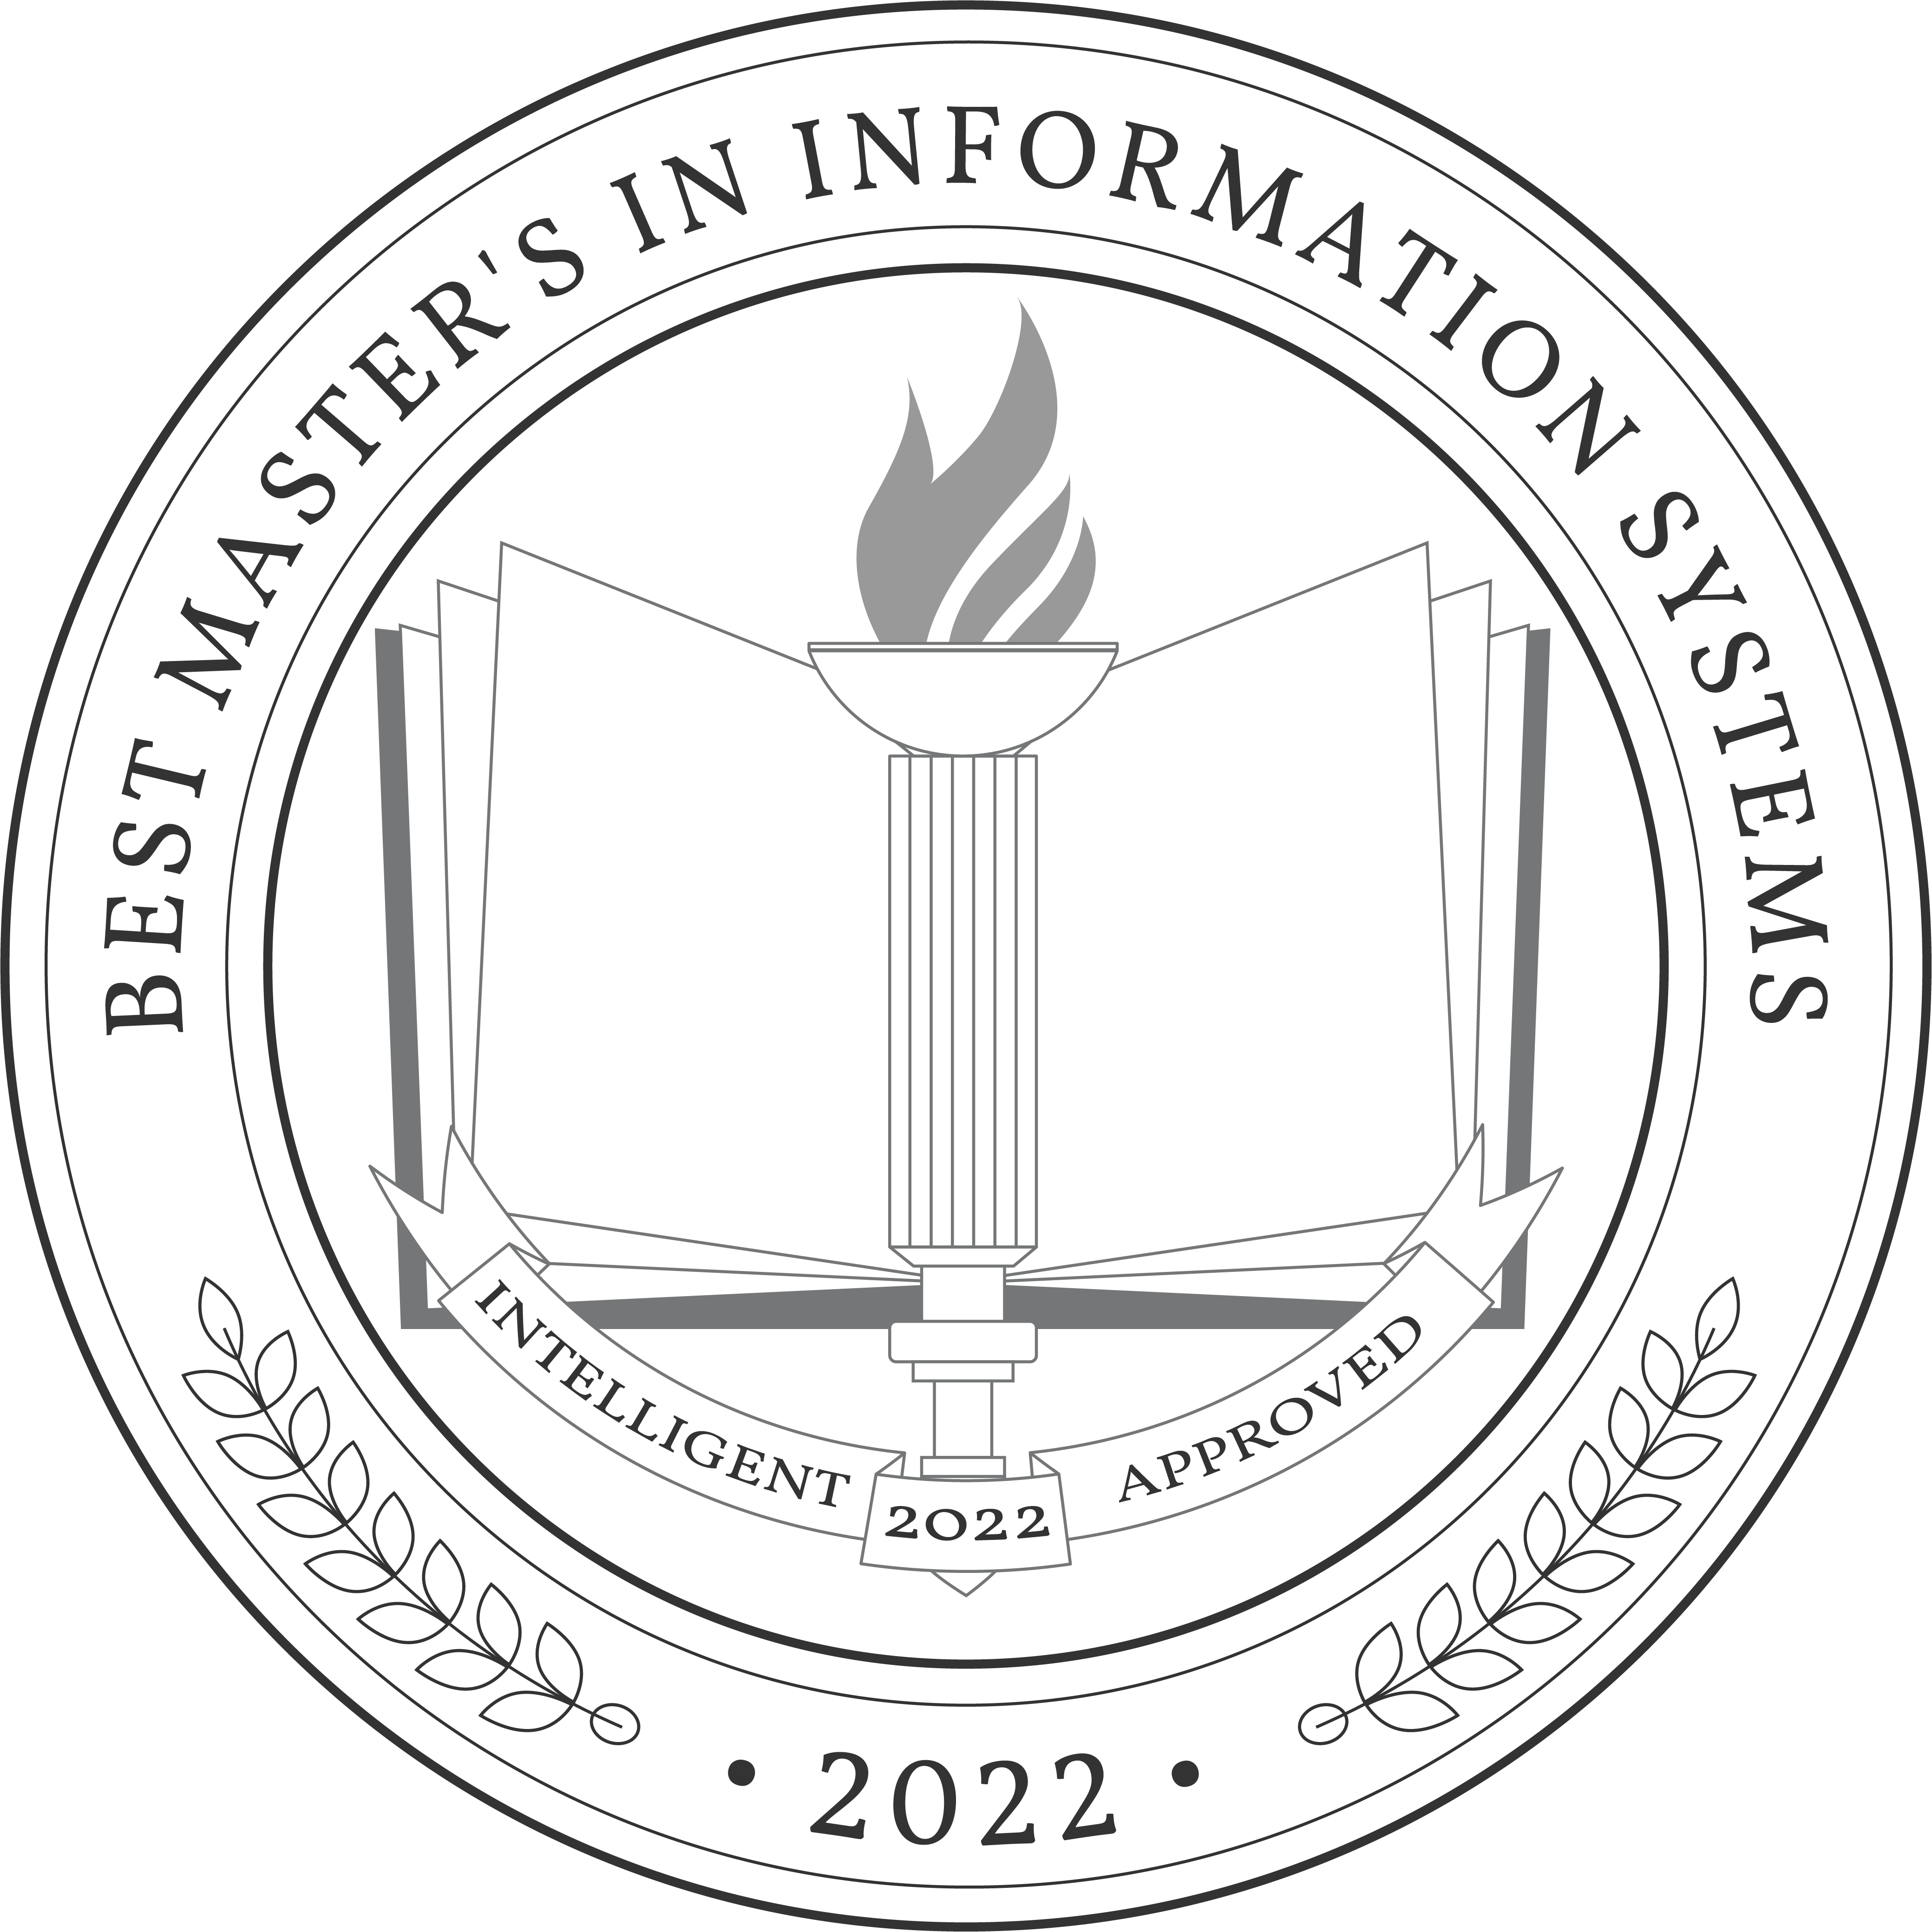 Best Master's in Information Systems Badge